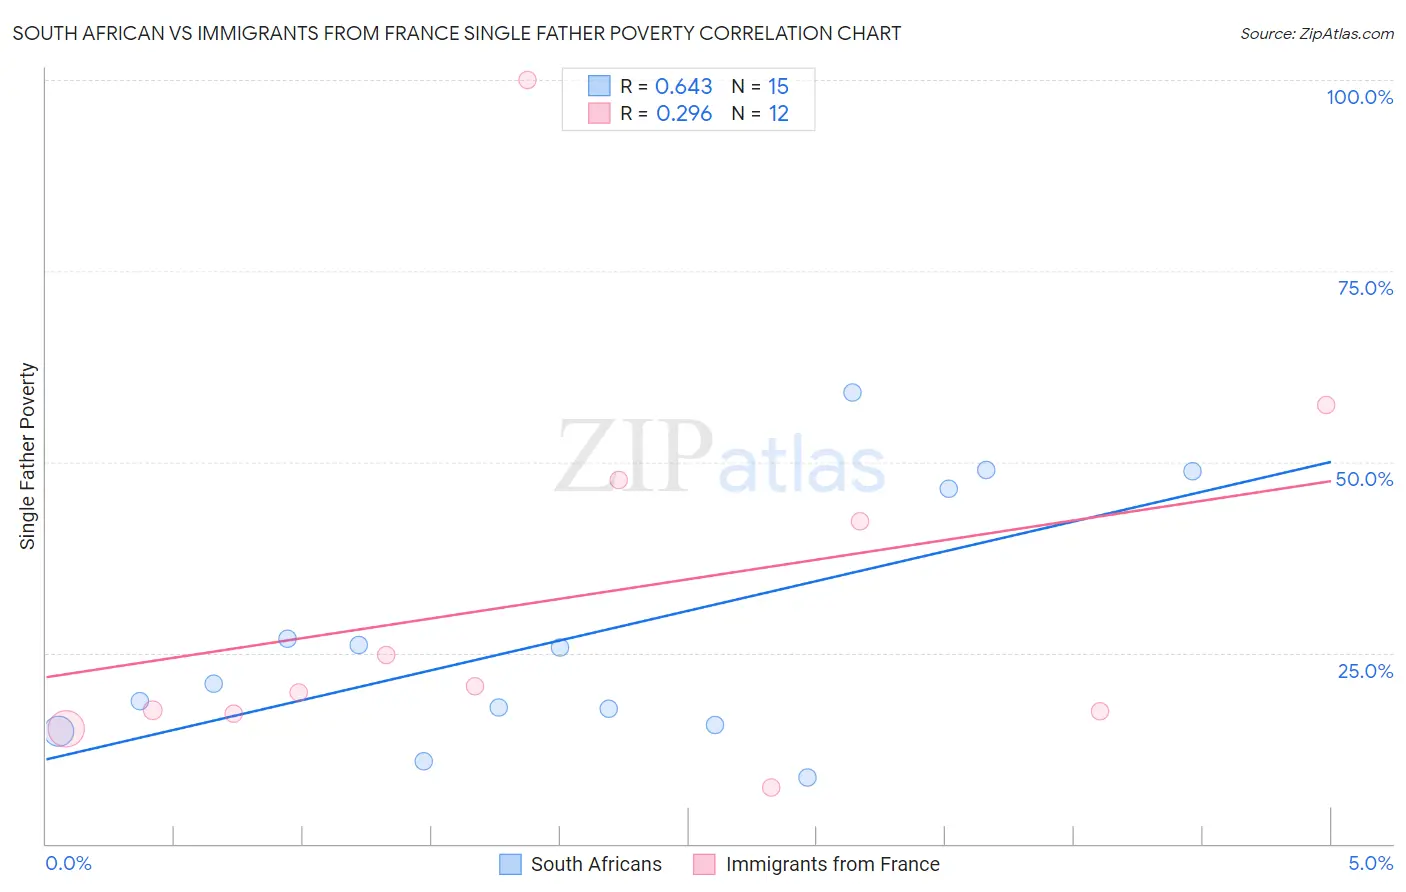 South African vs Immigrants from France Single Father Poverty